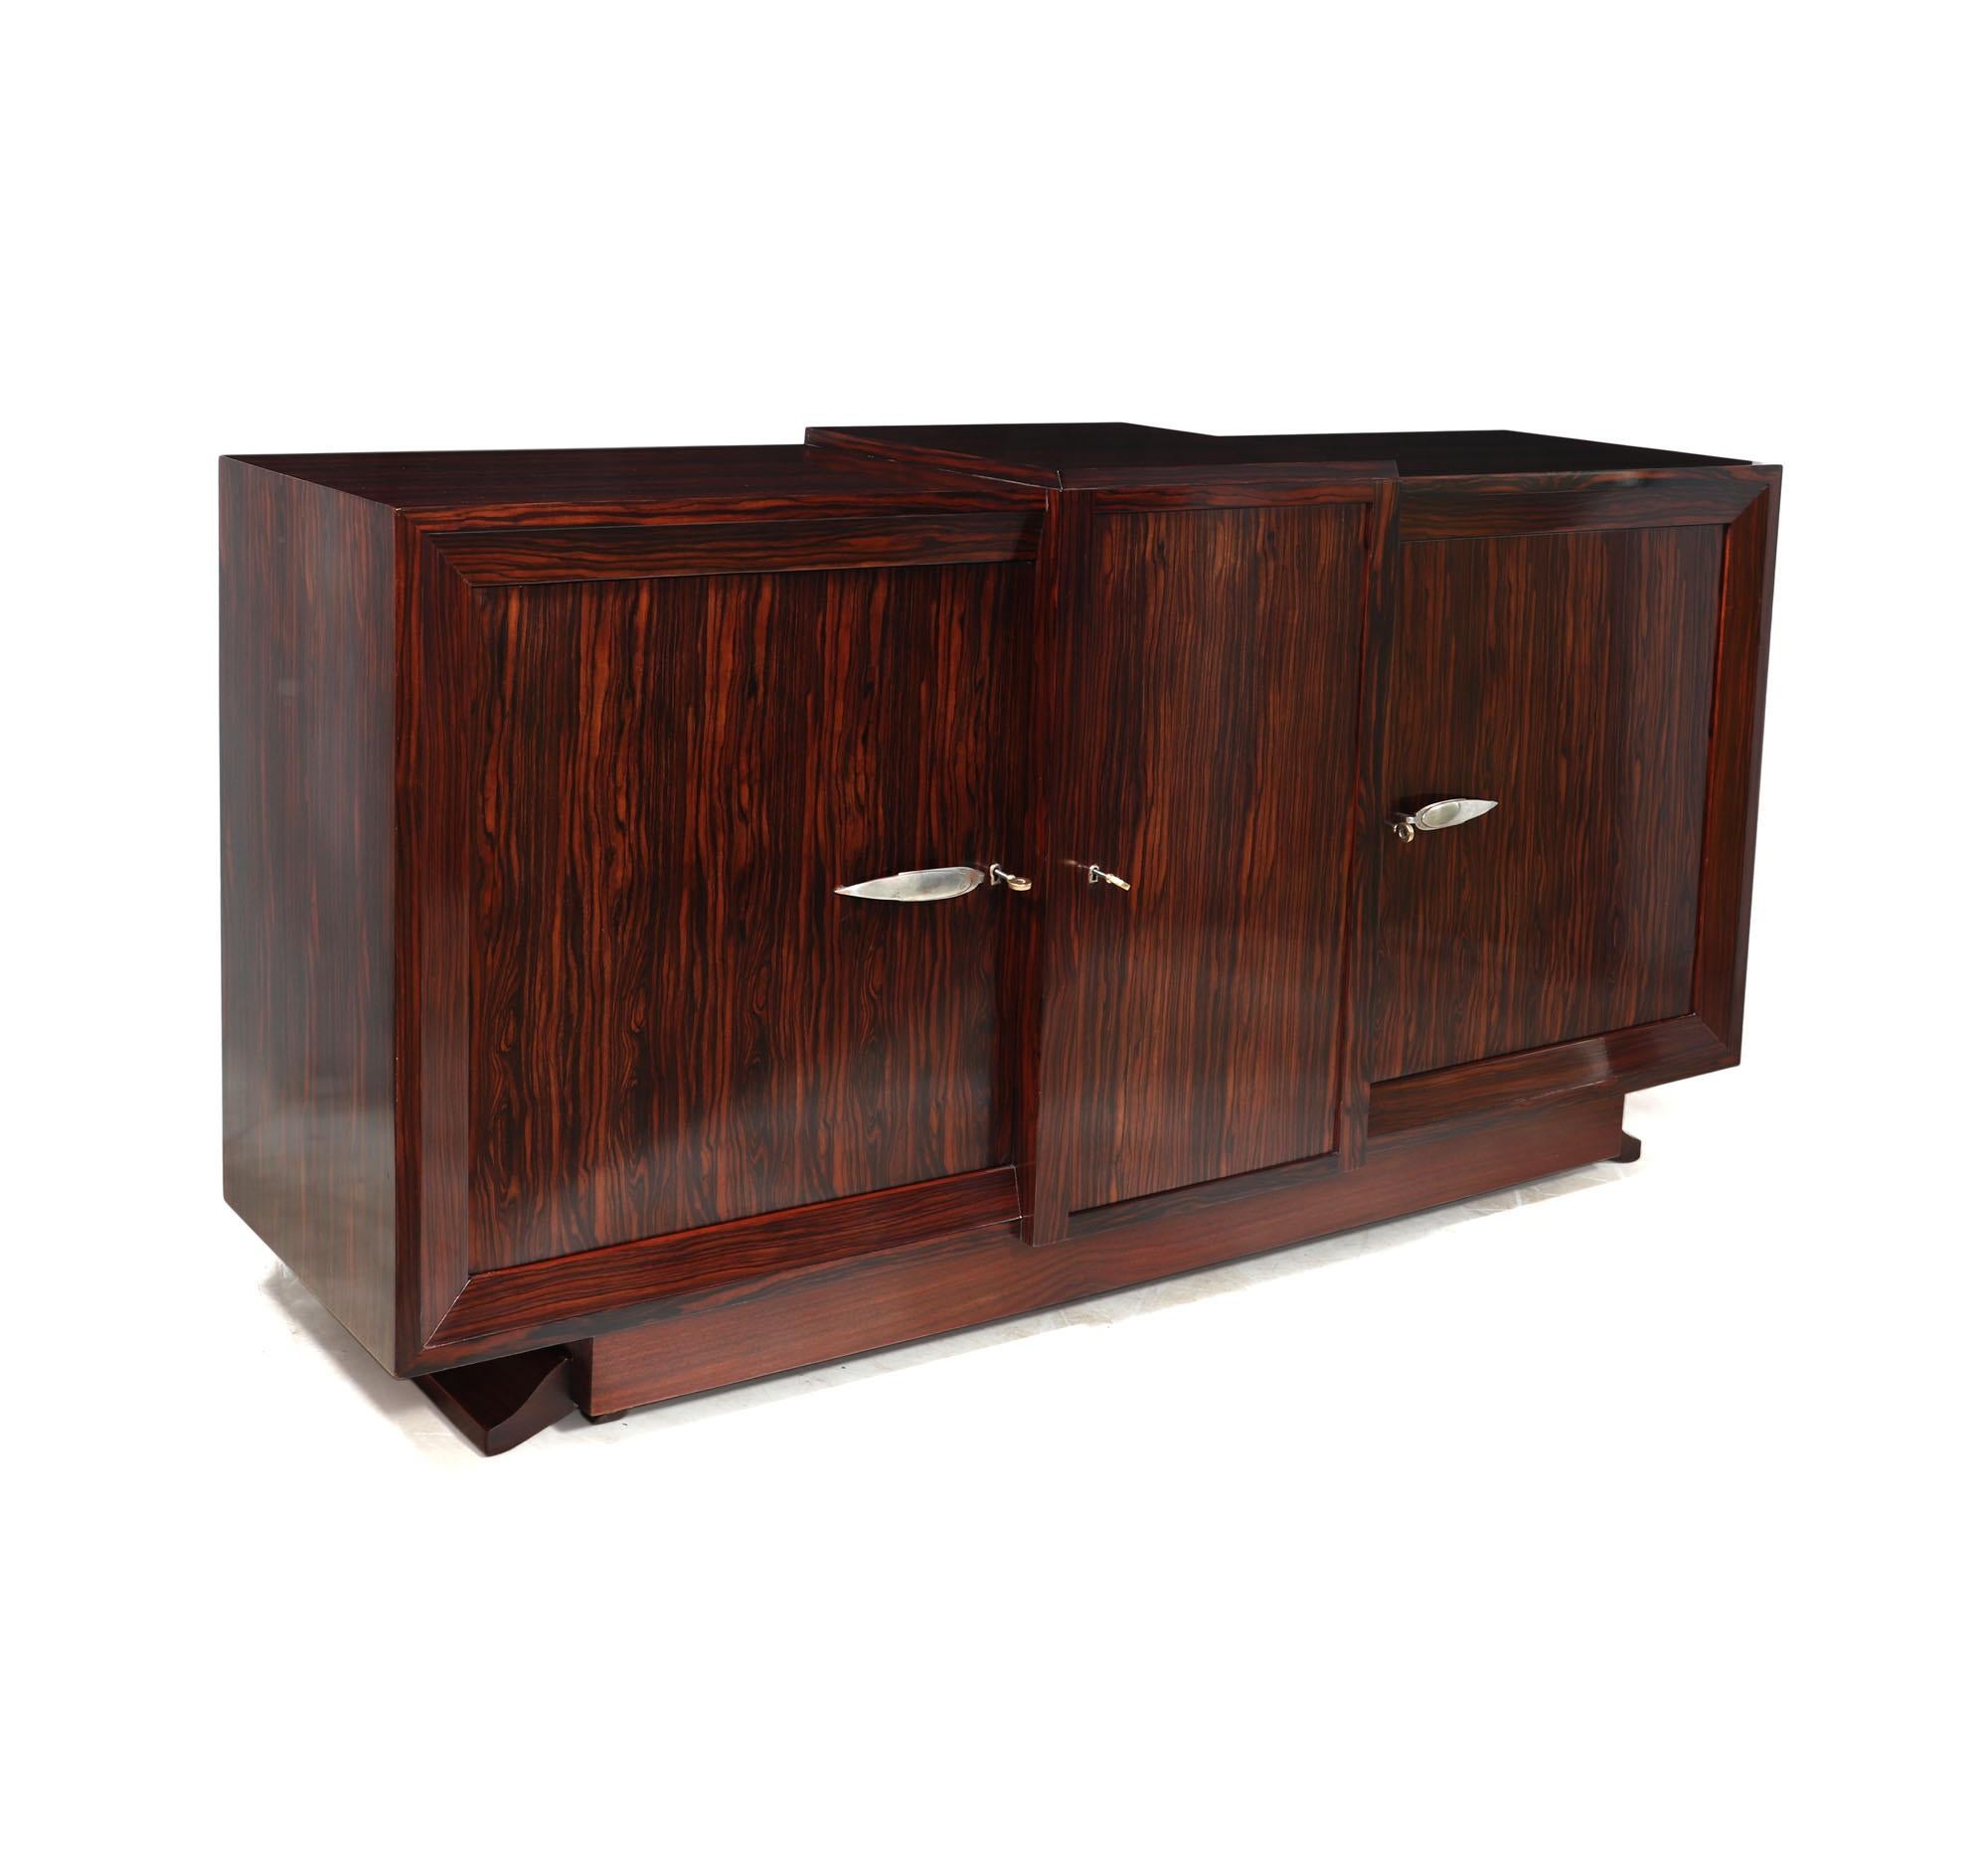 FRENCH ART DECO SIDEBOARD
A stunning French Art Deco sideboard in Macassar Ebony, this elegant piece was produced in France during the 1930s. The attention to detail is evident throughout, with three lockable doors featuring silvered leaf shaped